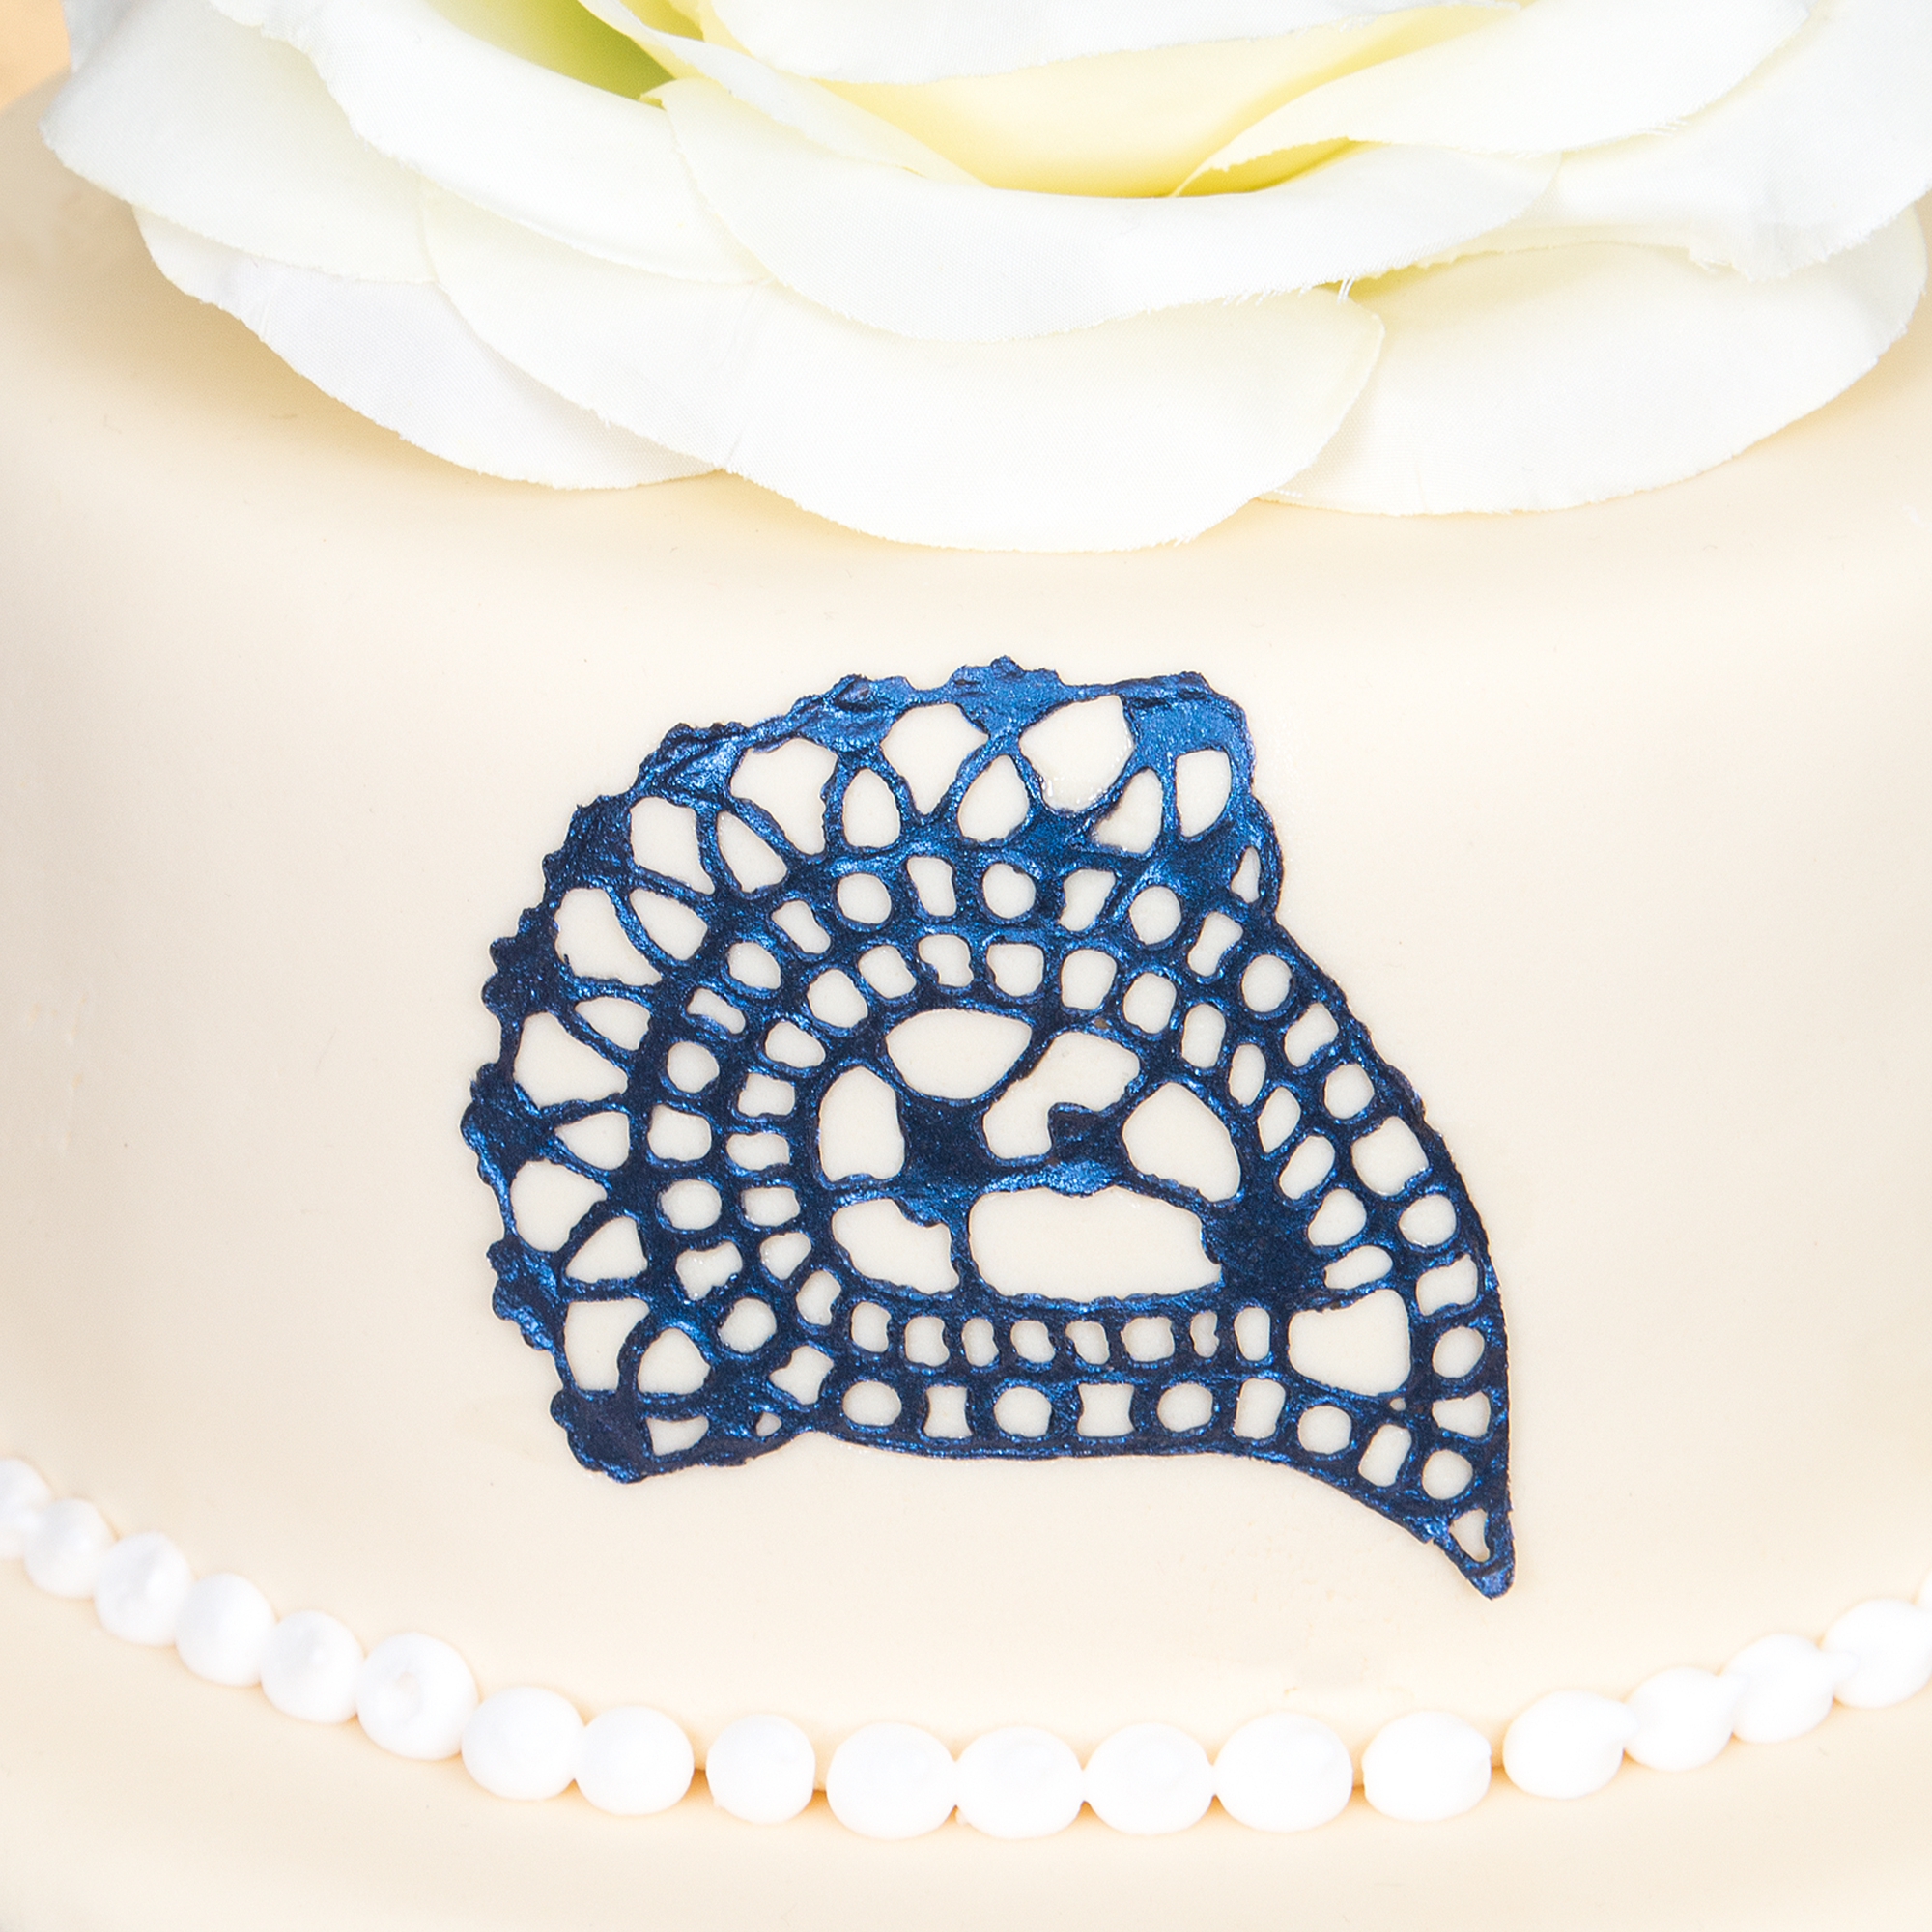 Städter - Cake lace mould Paisley - 39,5 x 7,5 cm - Silicone